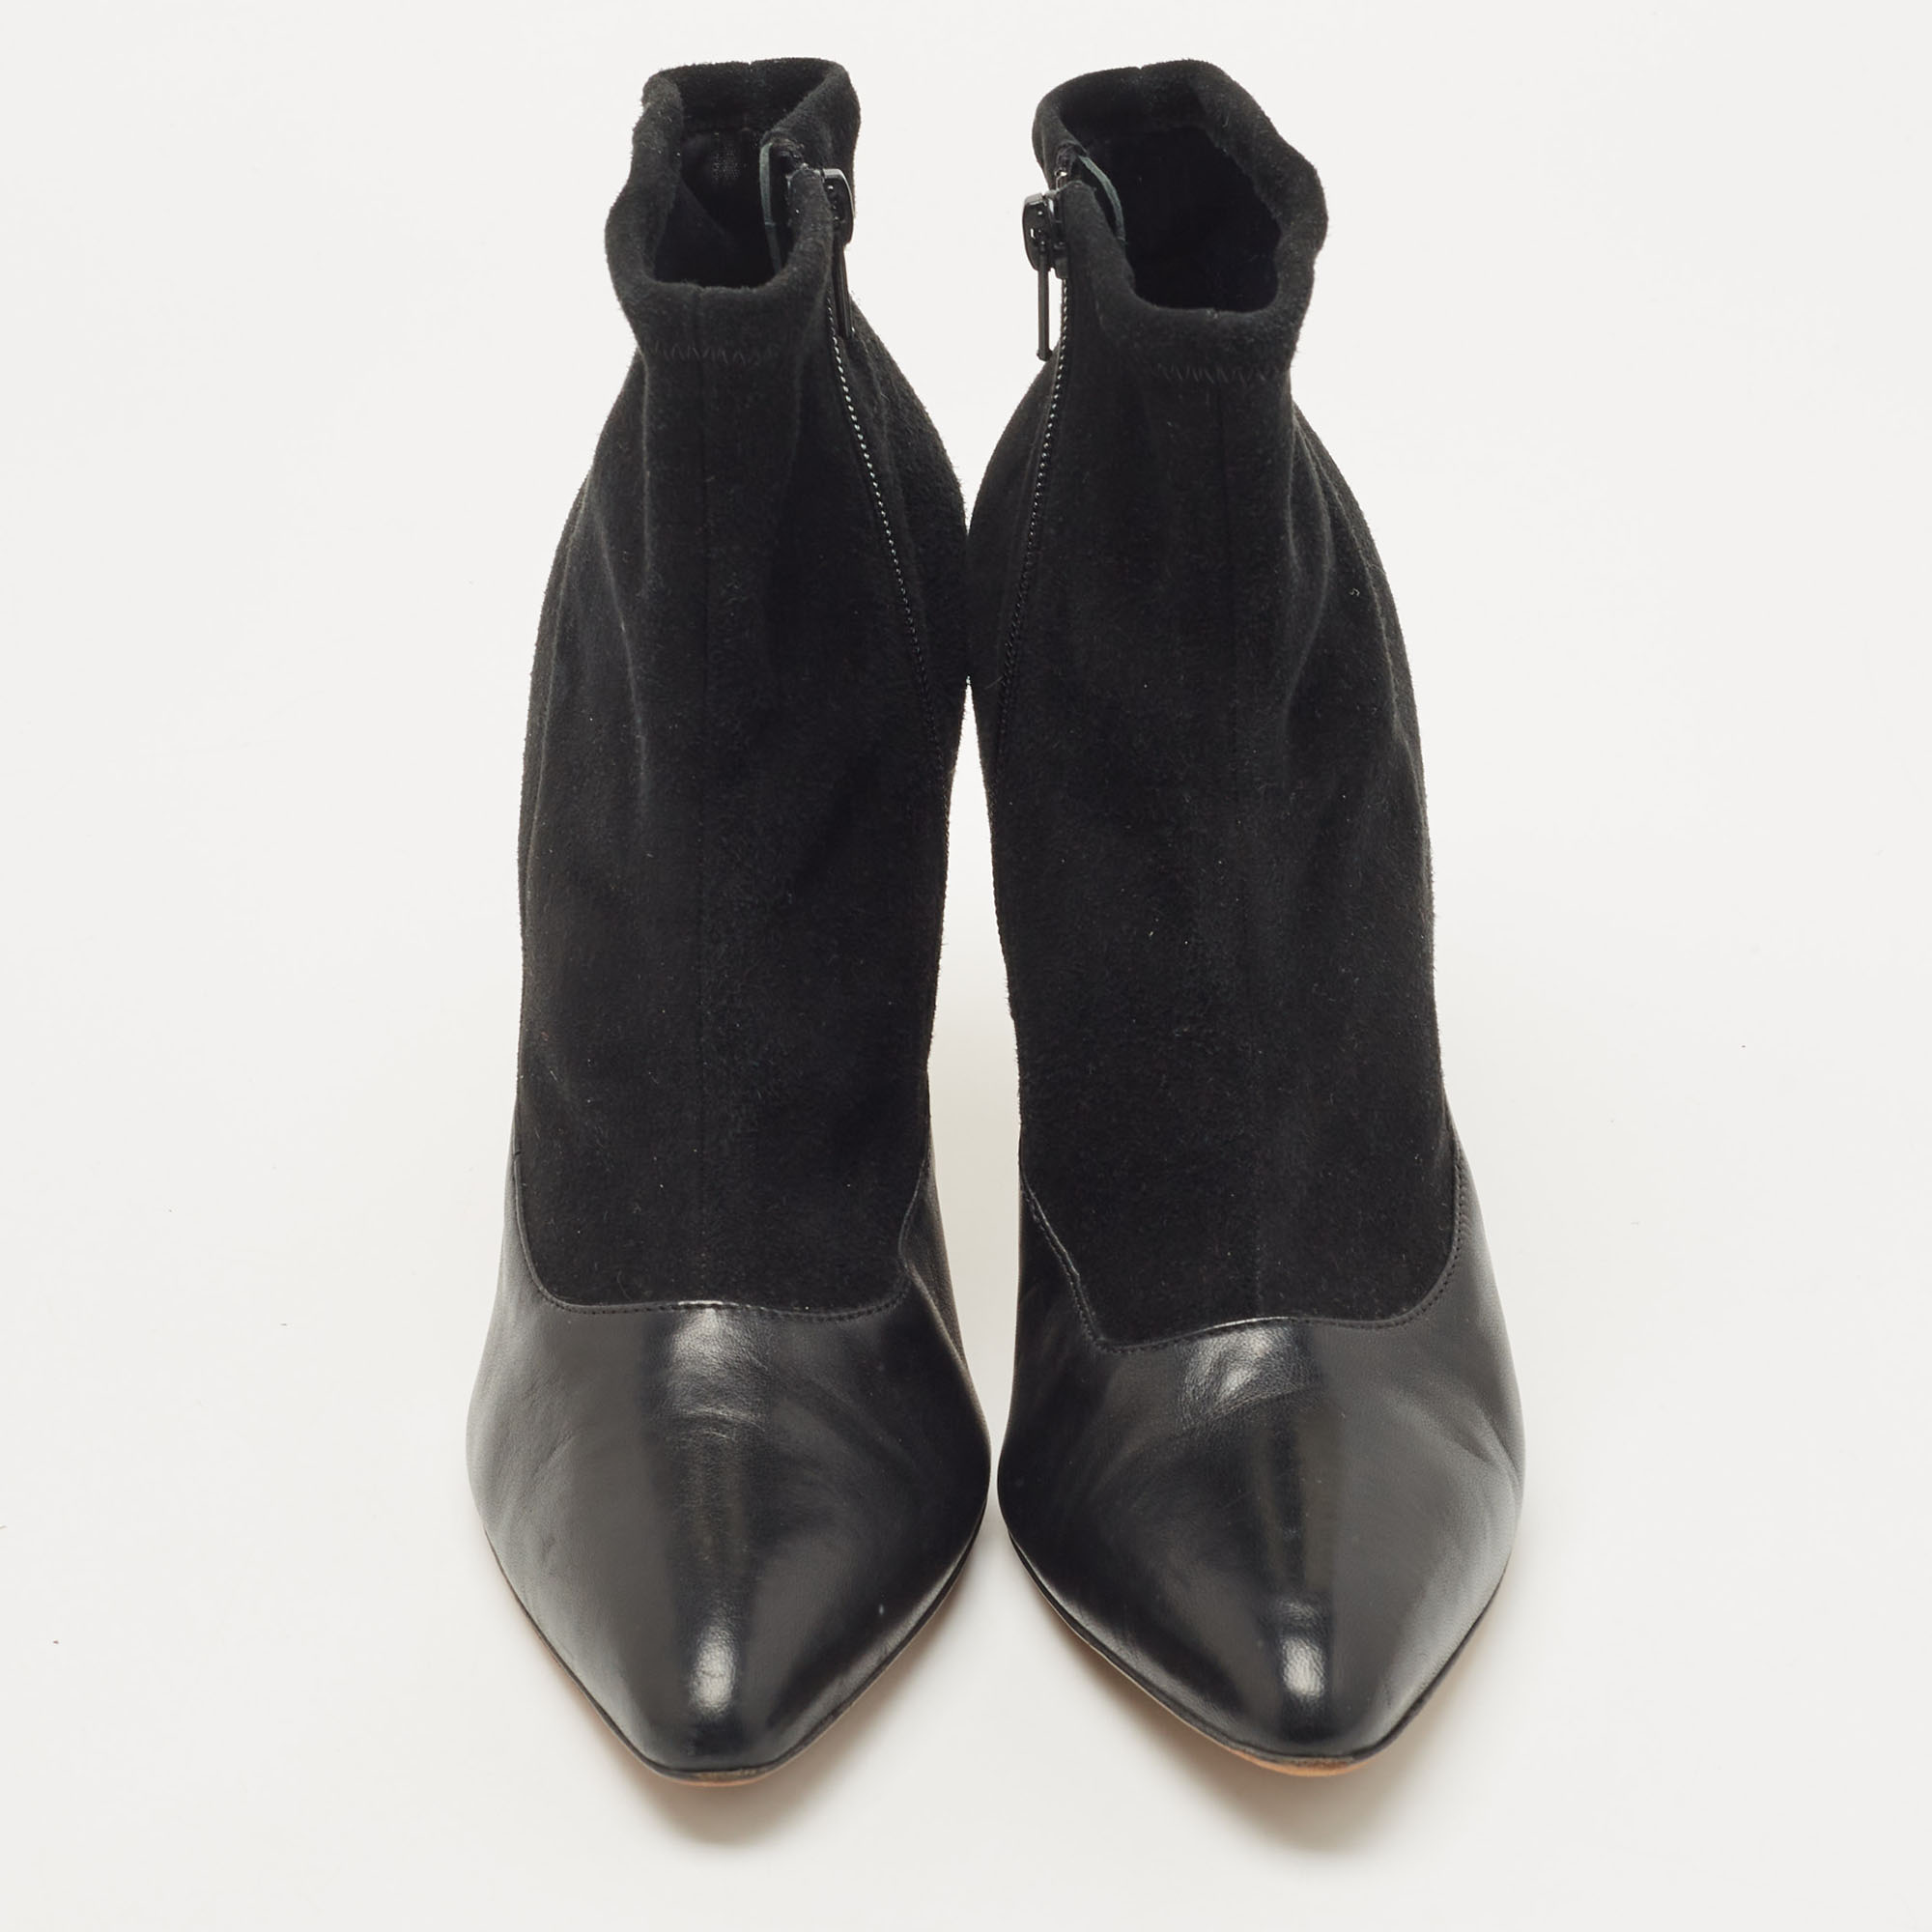 Givenchy Black Suede Ankle Boots Size 40